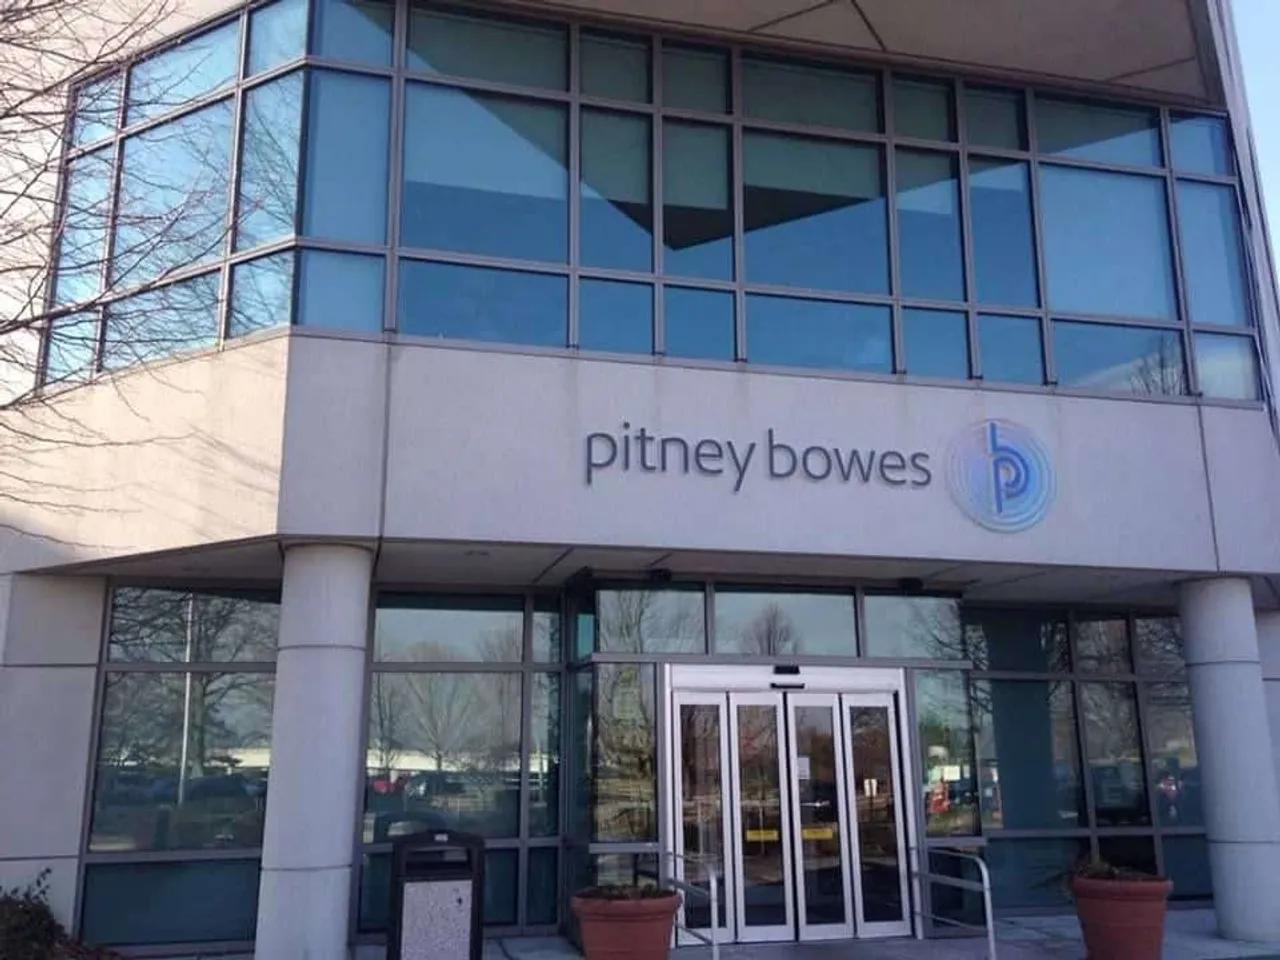 Pitney Bowes Makes it to 'Top 10 Best Indian Companies to Work For' List